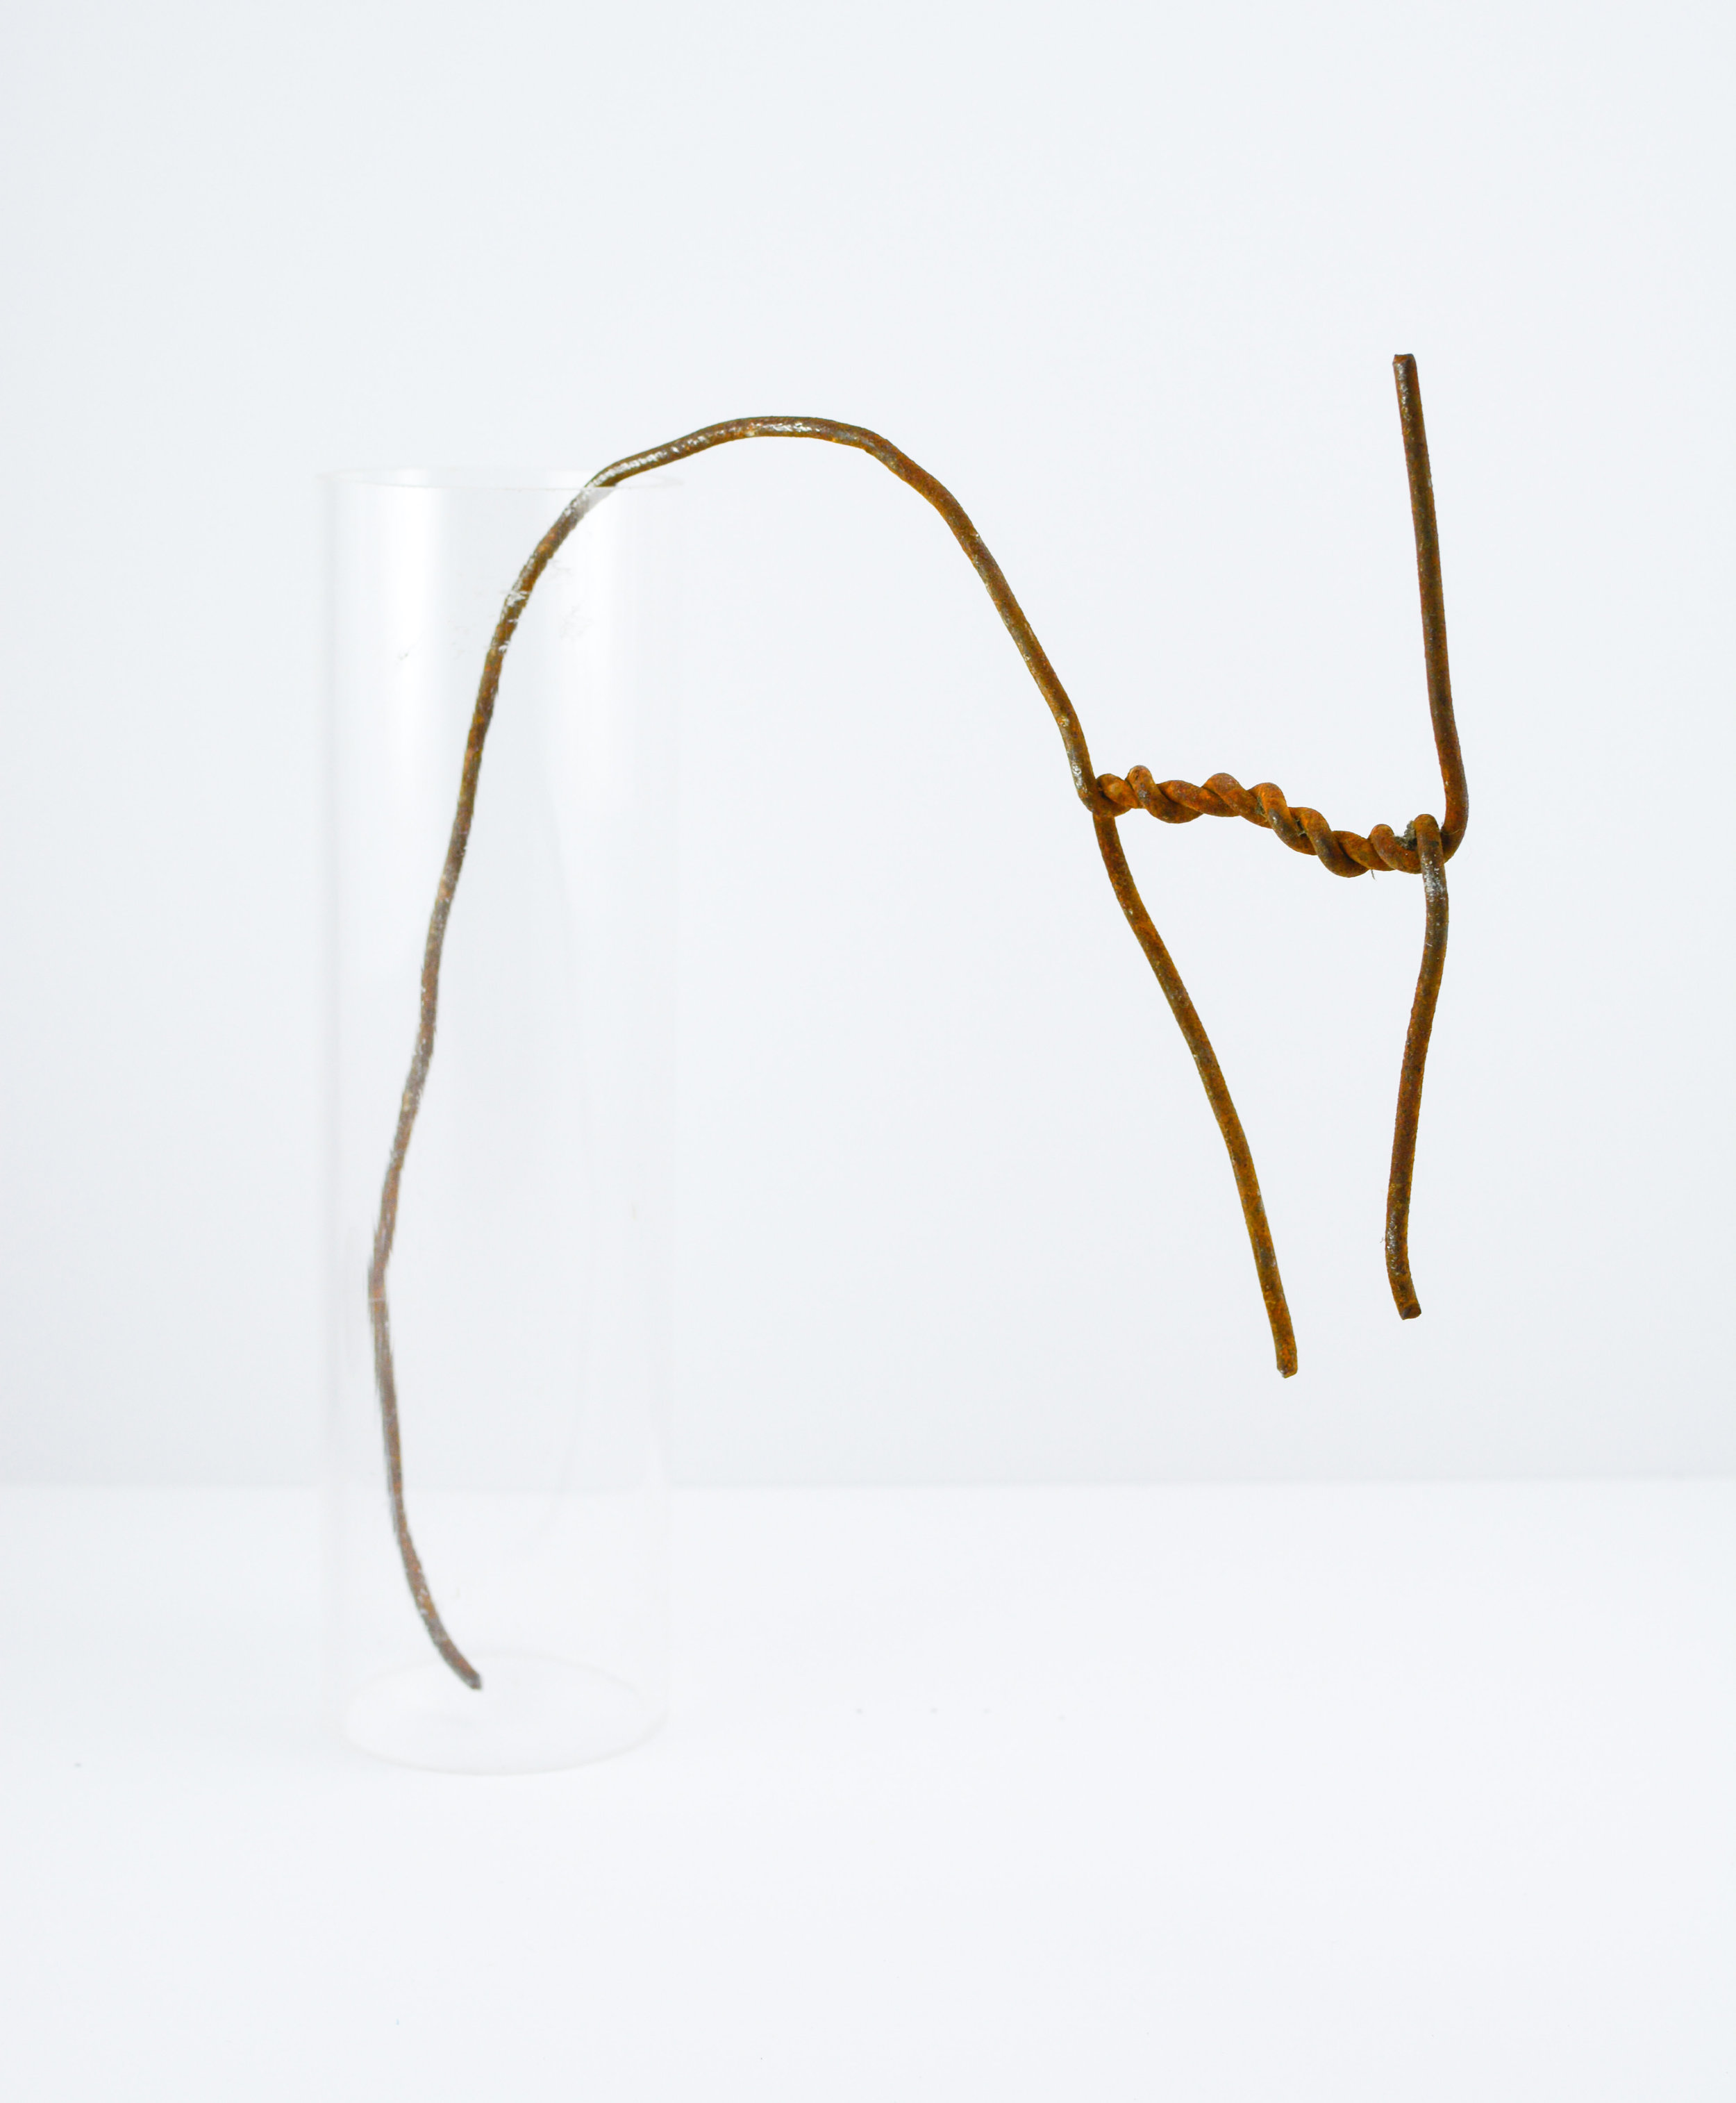  Melissa Staiger,  Rusted Wire in Plastic Tube  